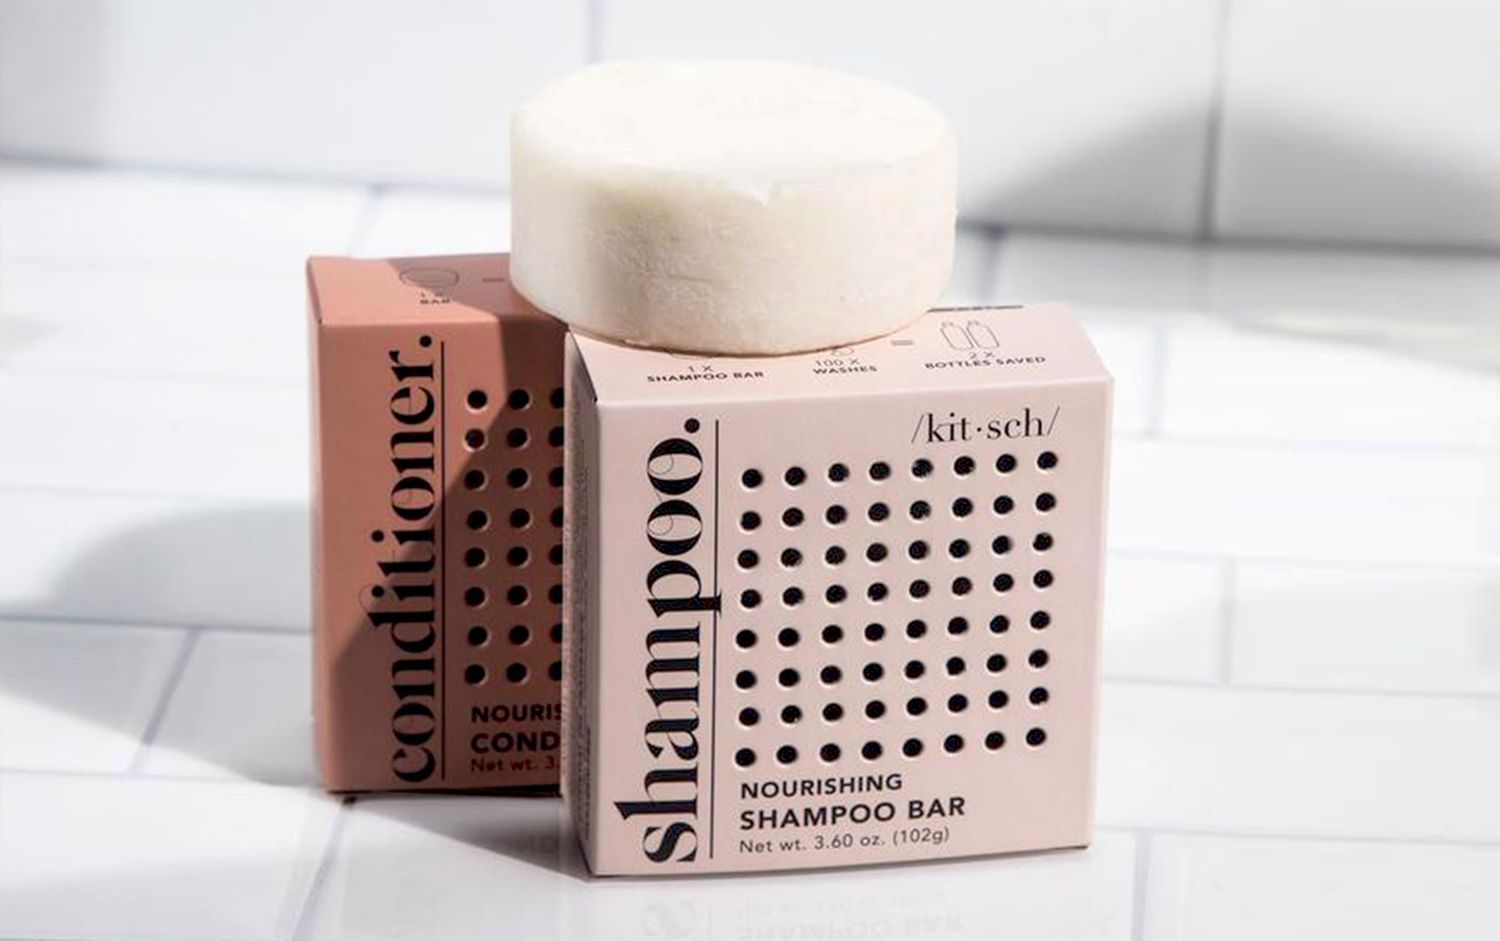 KITSCH brand shampoo and conditioner bars in a shower